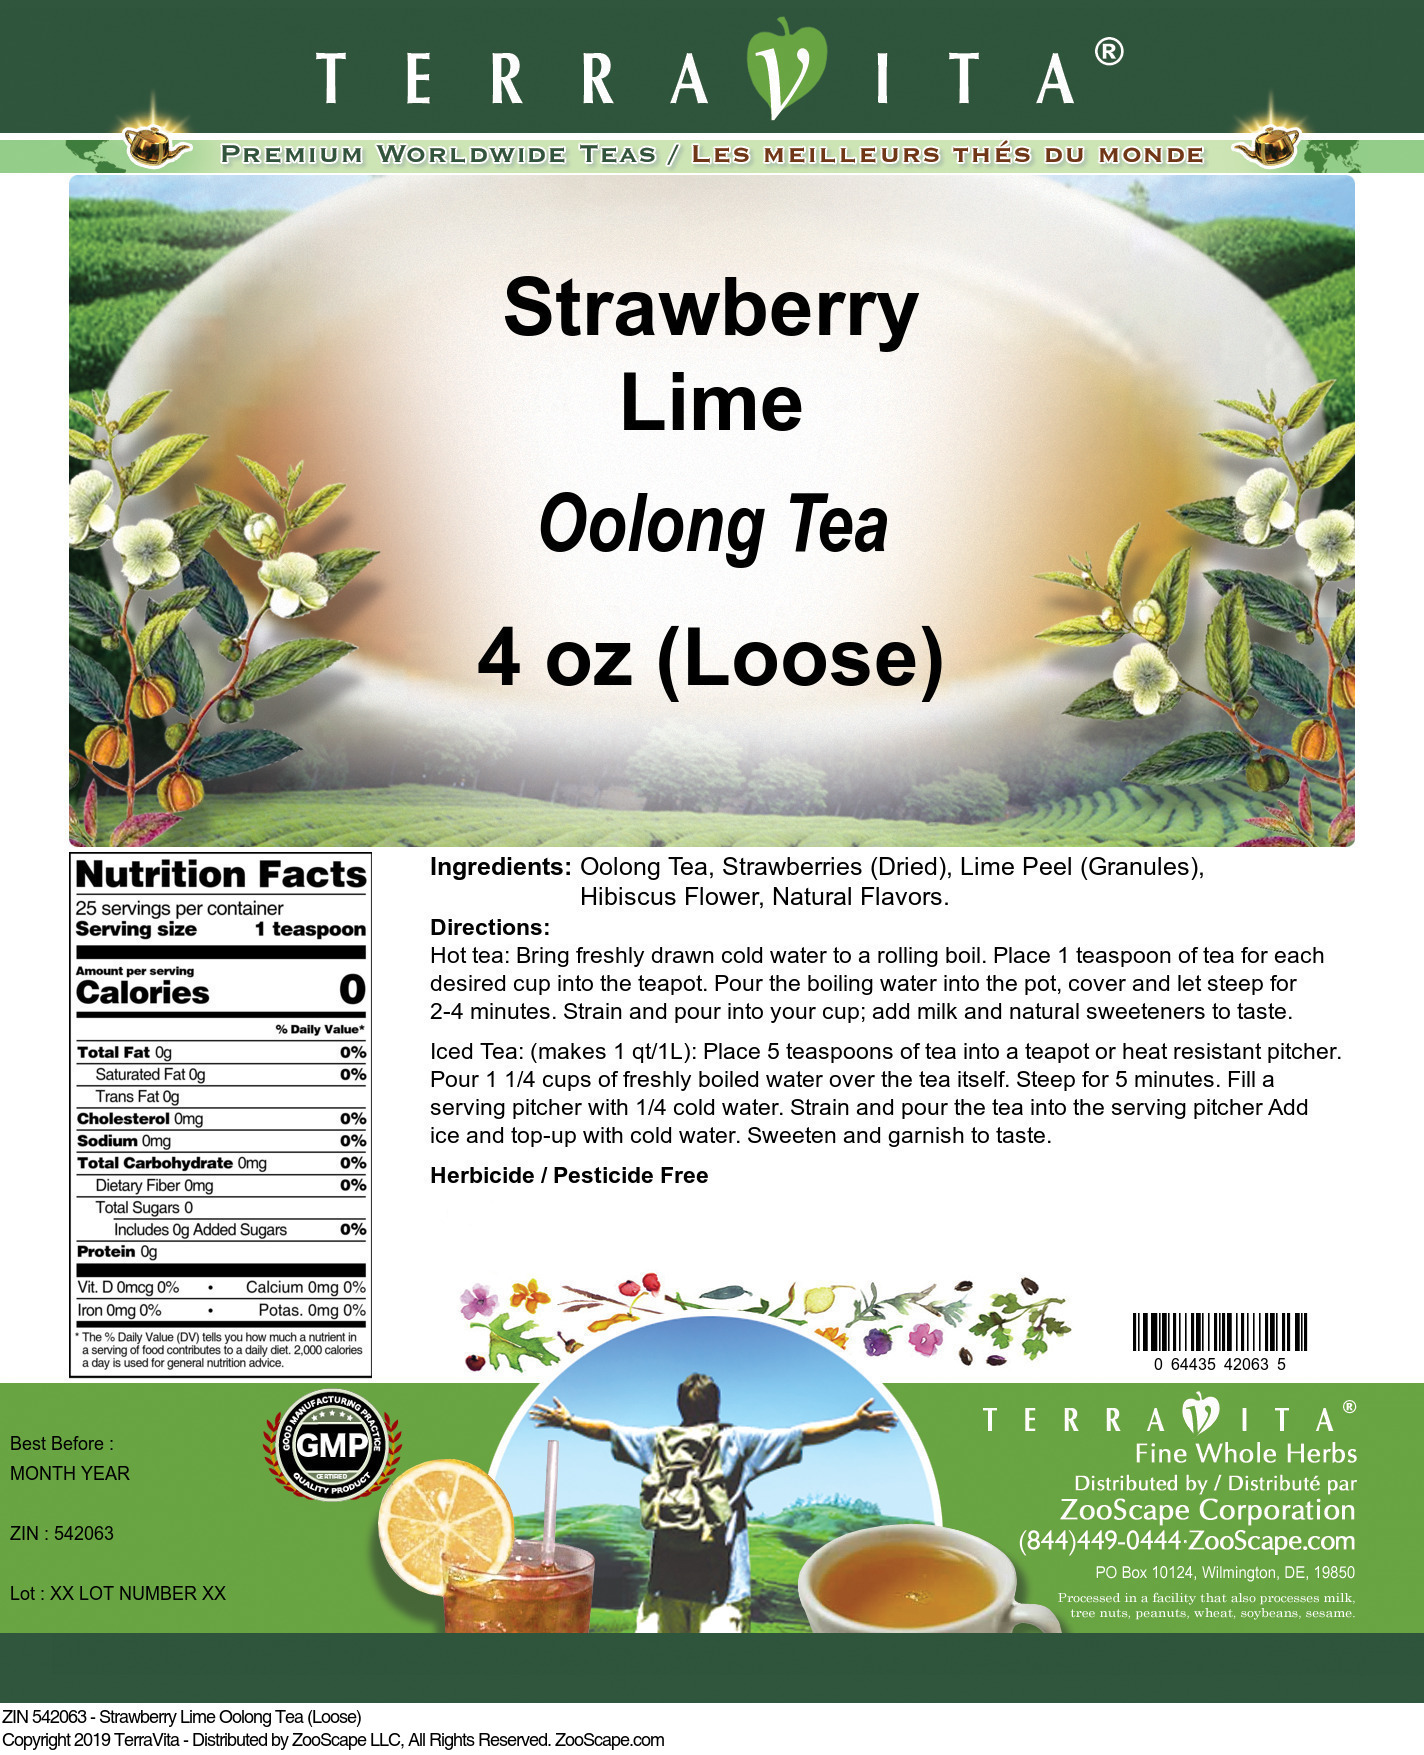 Strawberry Lime Oolong Tea (Loose) - Label